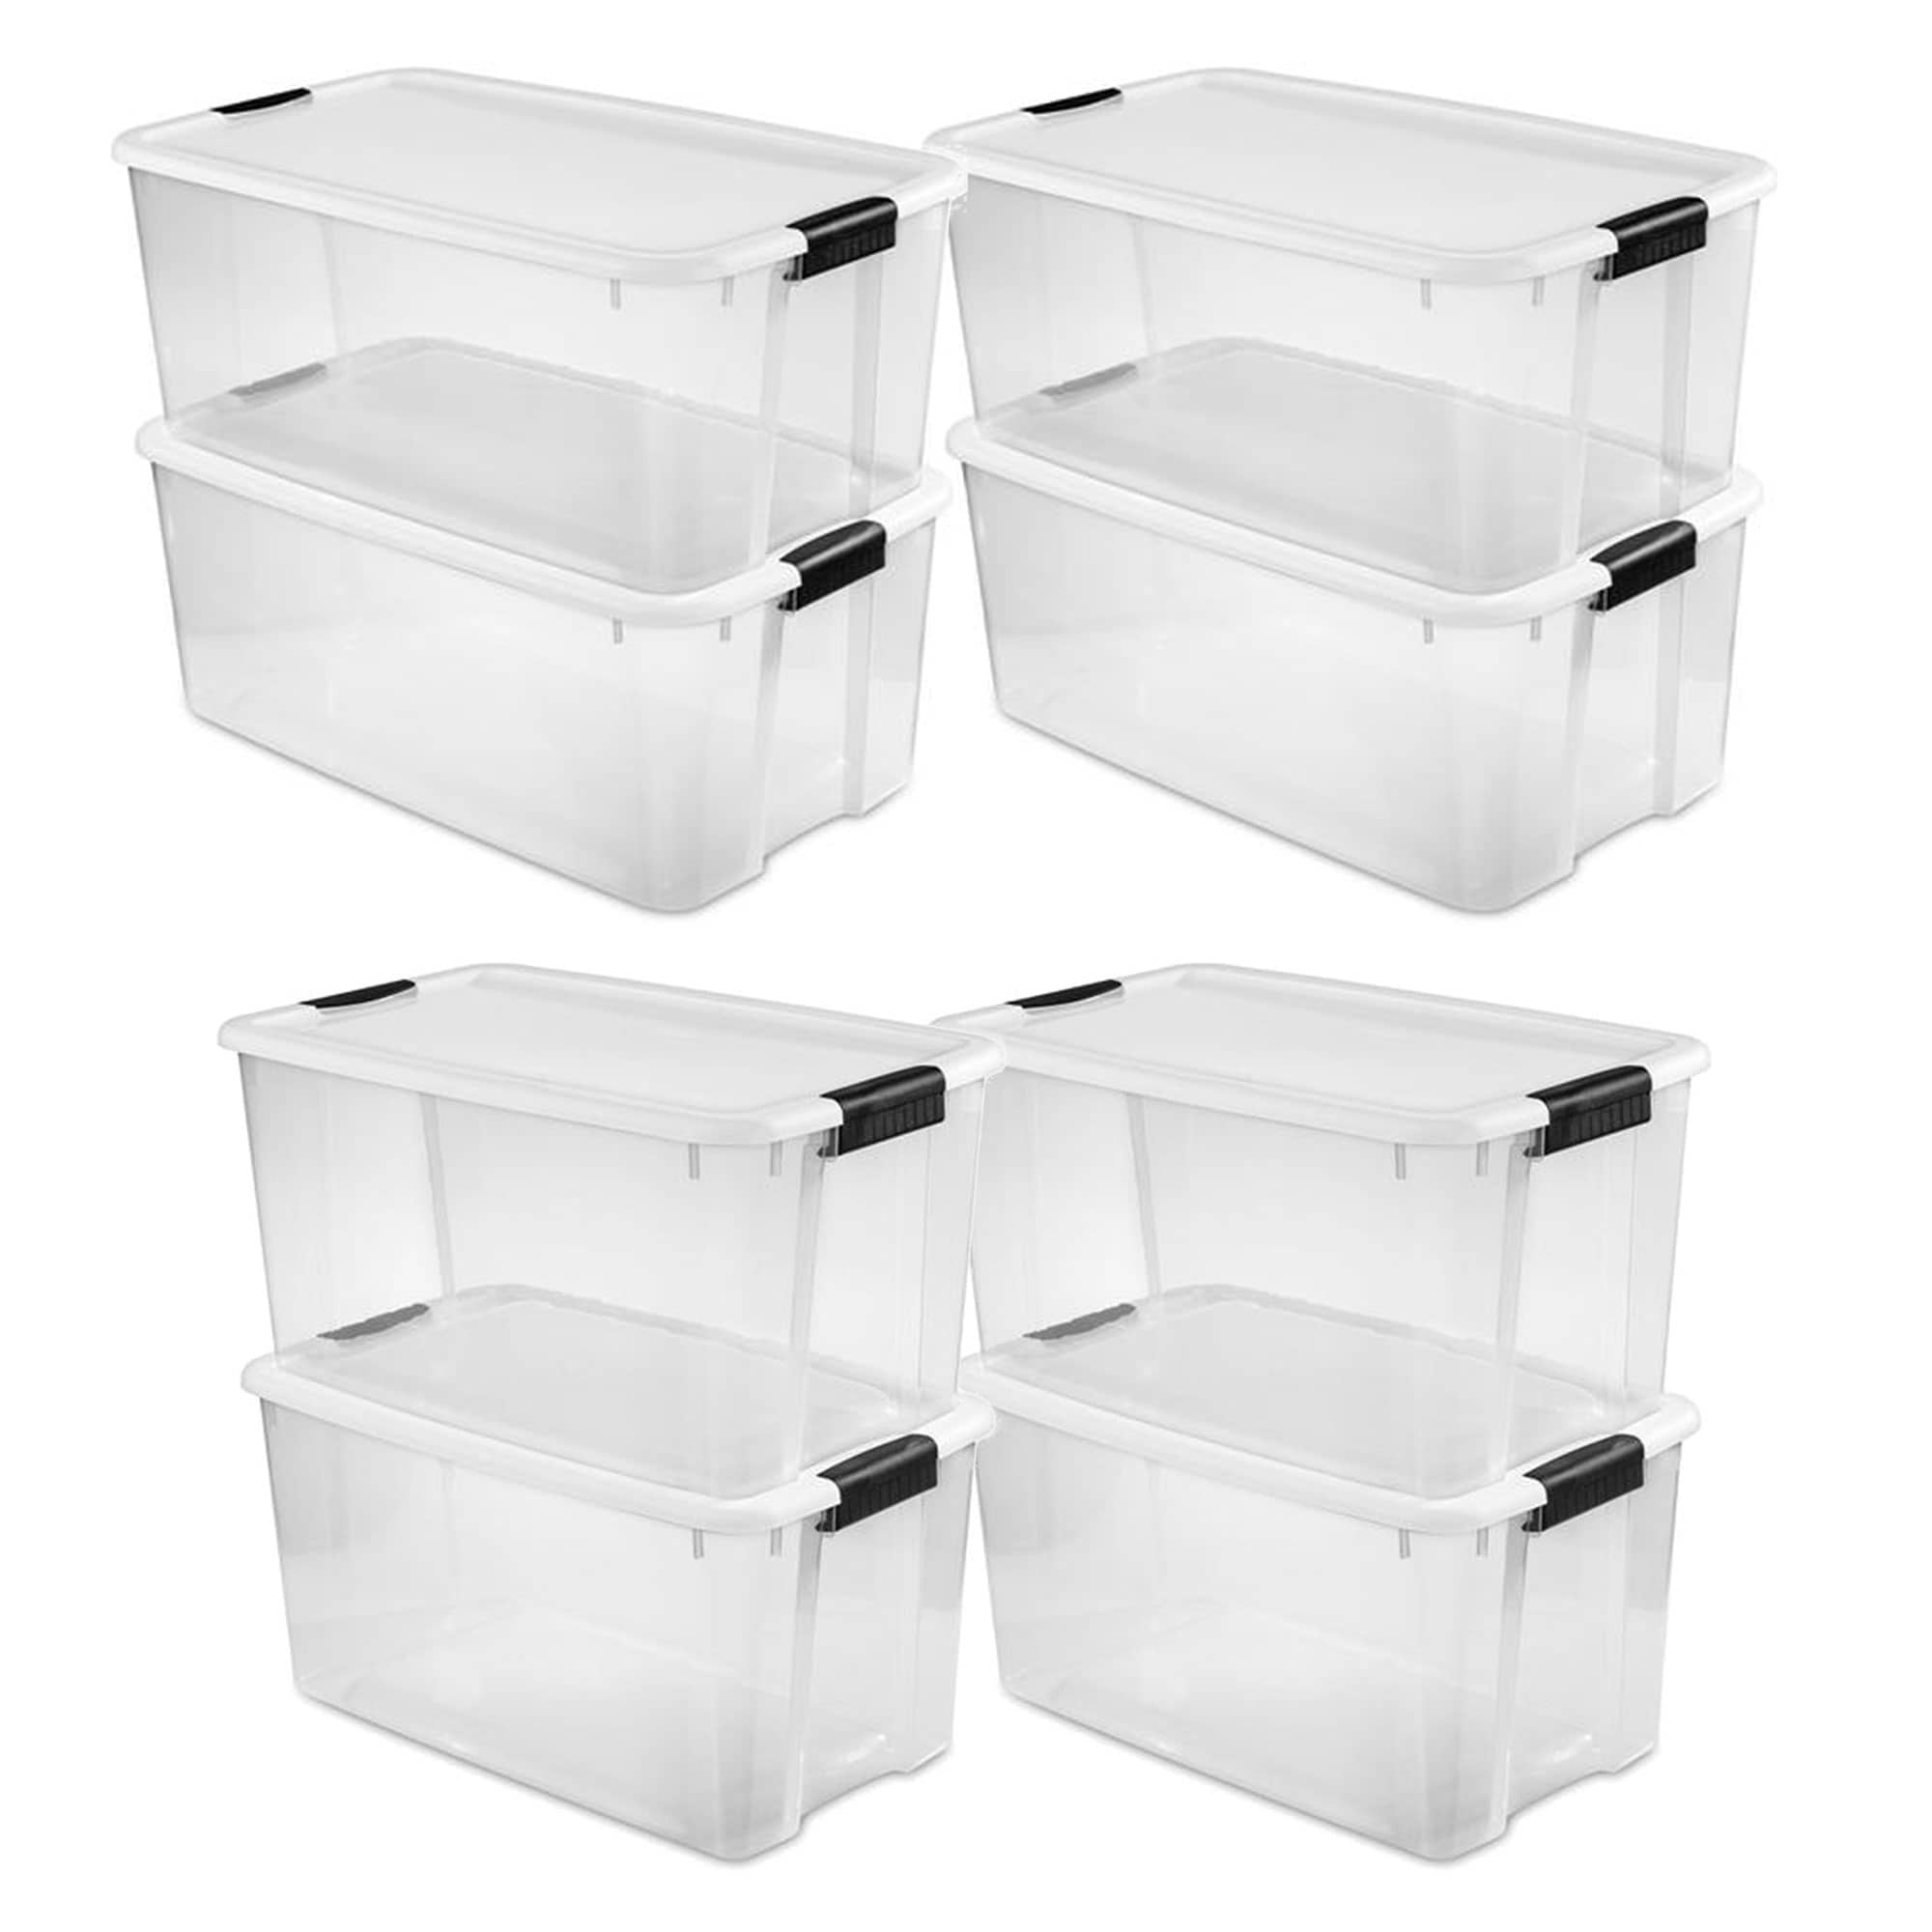 https://ak1.ostkcdn.com/images/products/is/images/direct/dc04e12032fd8e3a53fb0fe5379632dad01eef8e/Sterilite-116-Qt-Clear-Storage-Tote%2C-4-Pack%2C-%26-70-Qt-Clear-Storage-Tote%2C-4-Pack.jpg